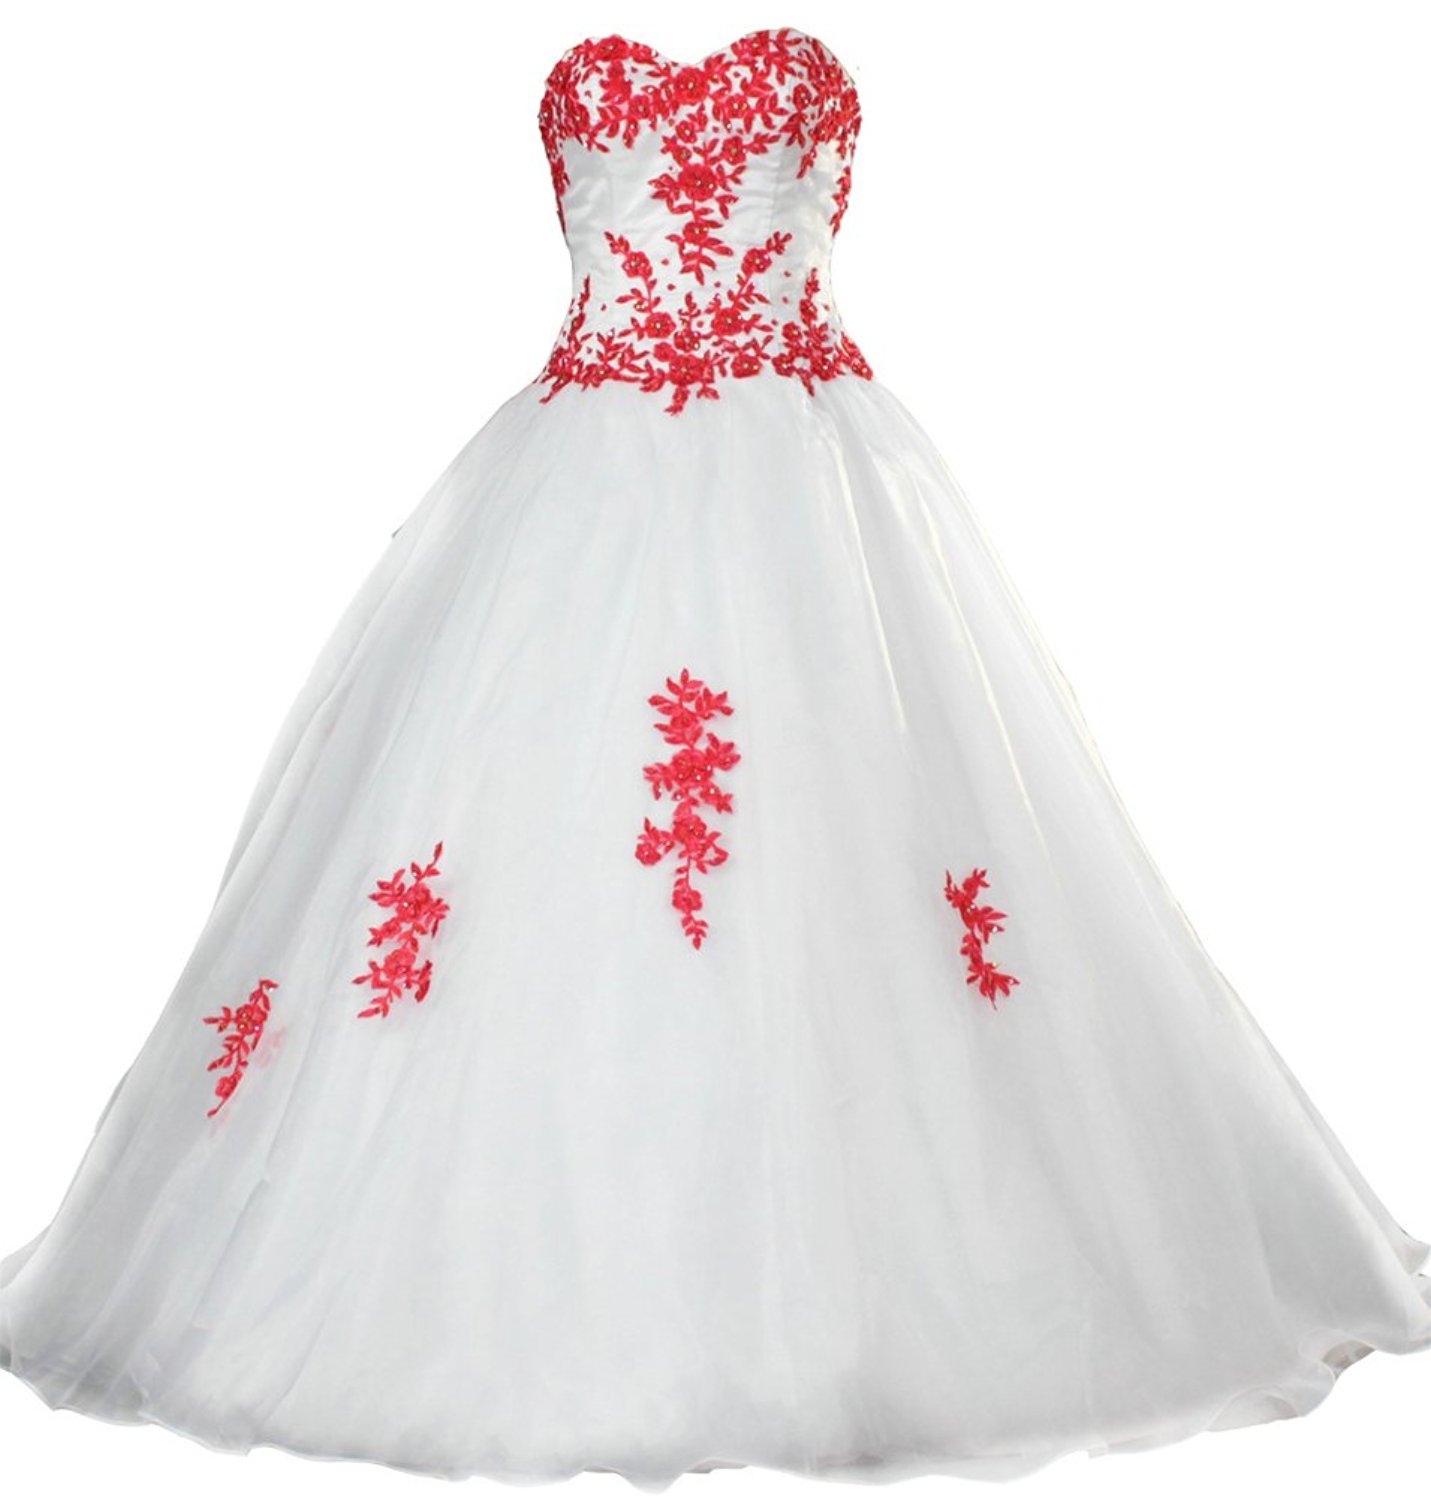 red and white dress wedding